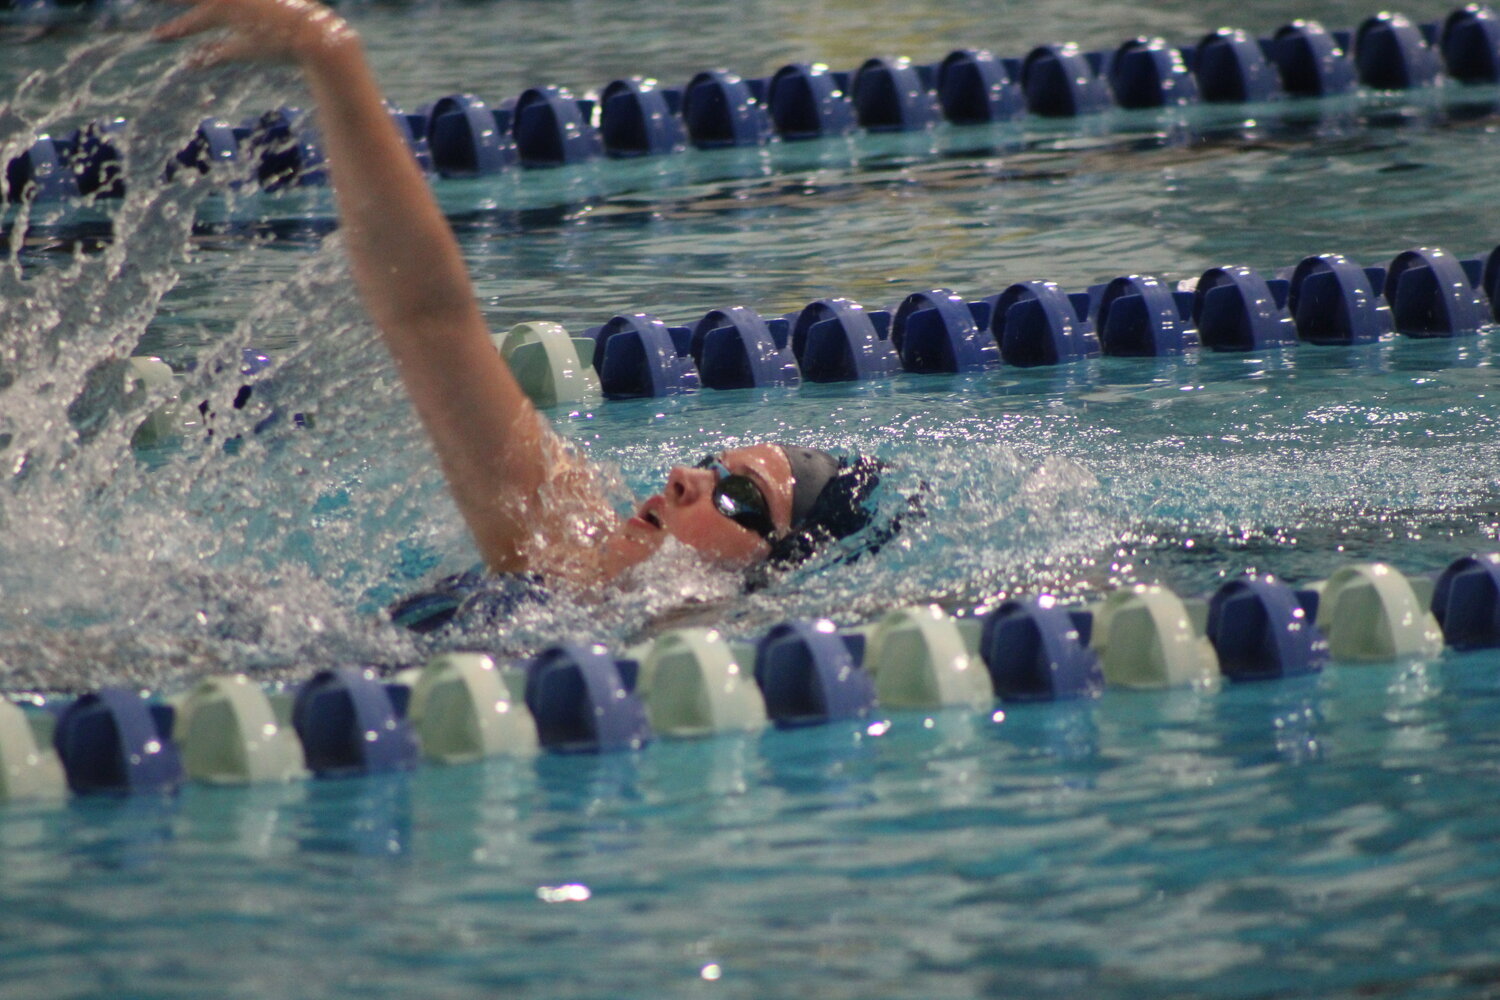 North Montgomery's Dustin Robinson brought home the county title in the 100 backstroke.